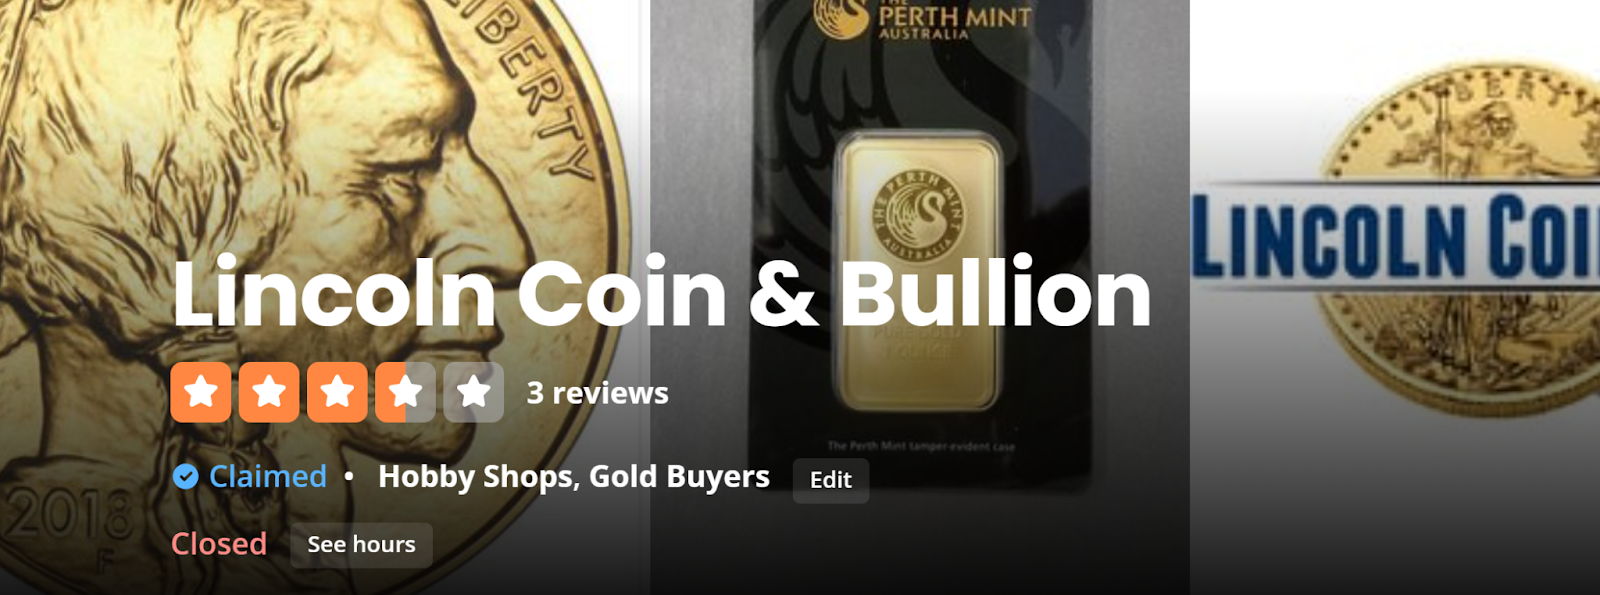 Lincoln Coin & Bullion ratings on Yelp